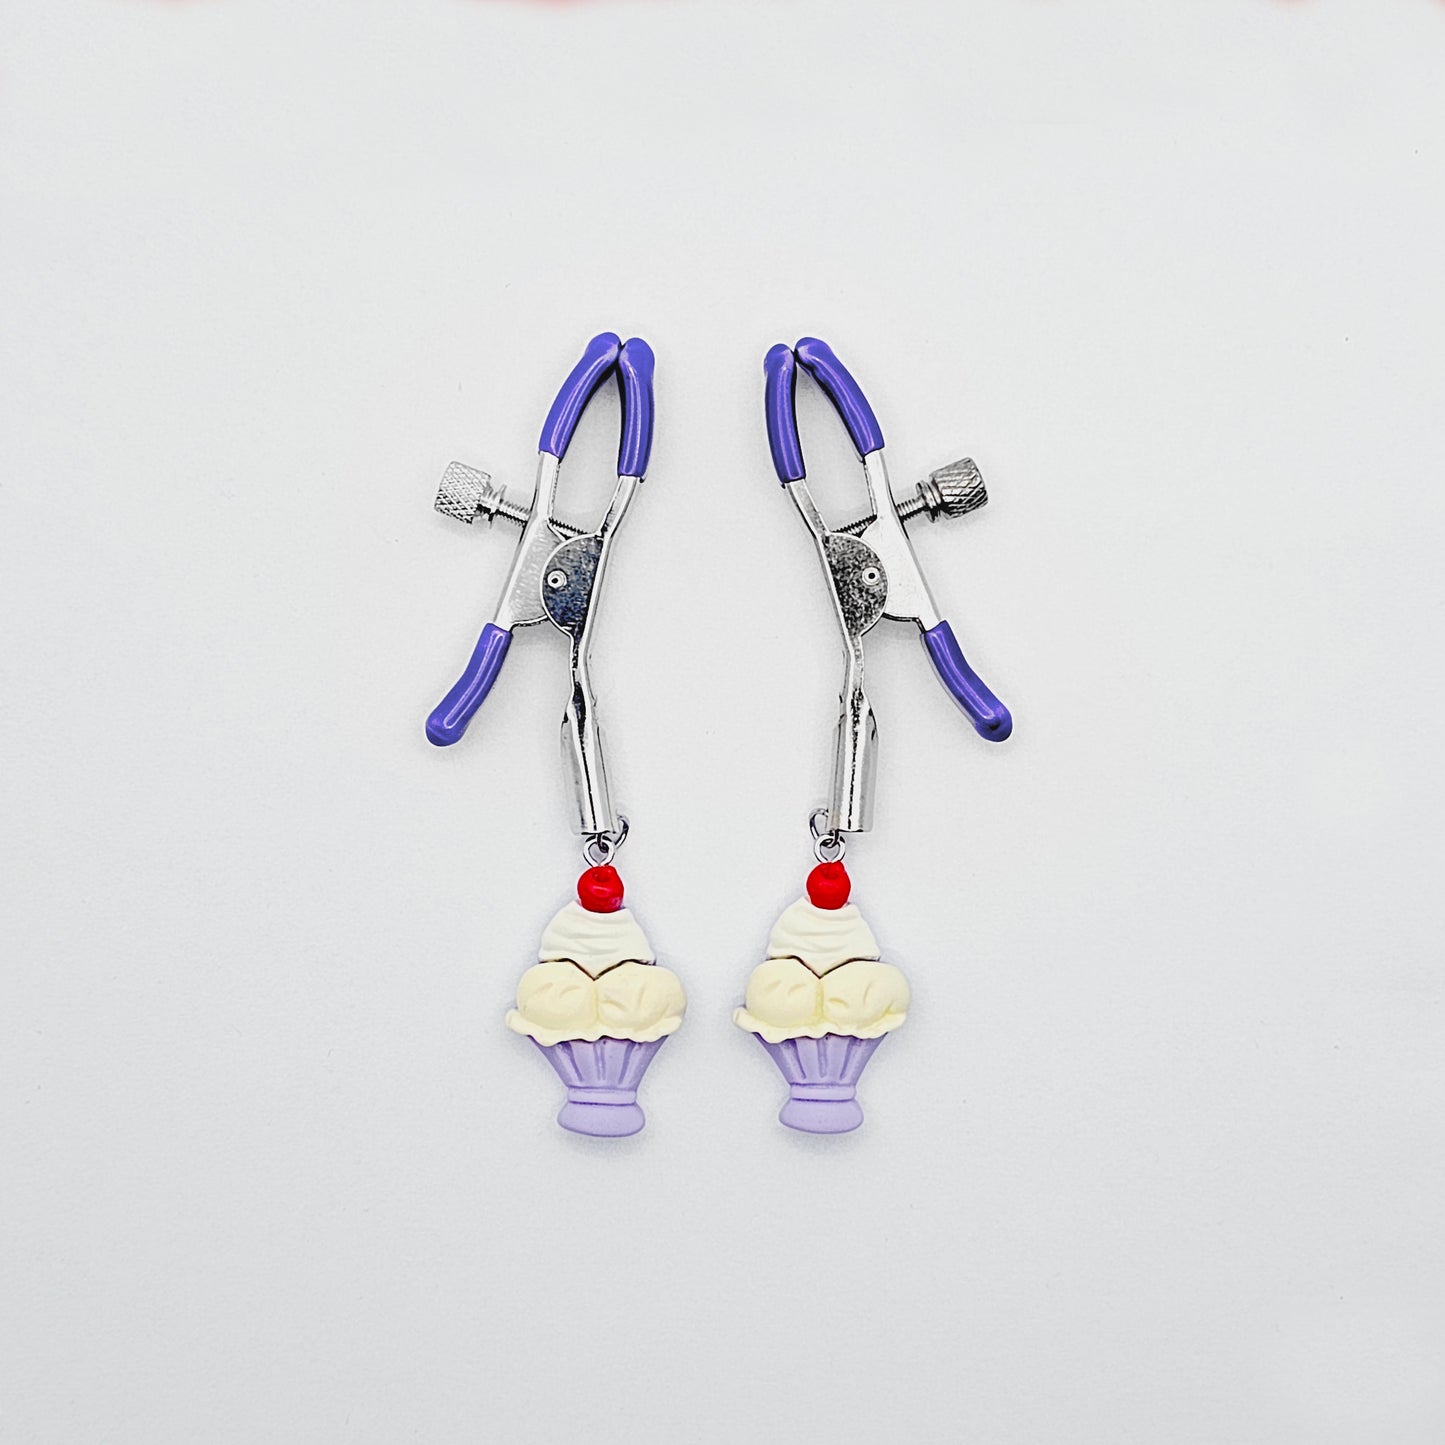 Purple Adjustable Nipple Clamps with Ice Cream Sundae for BDSM DDLG Summertime Fun!